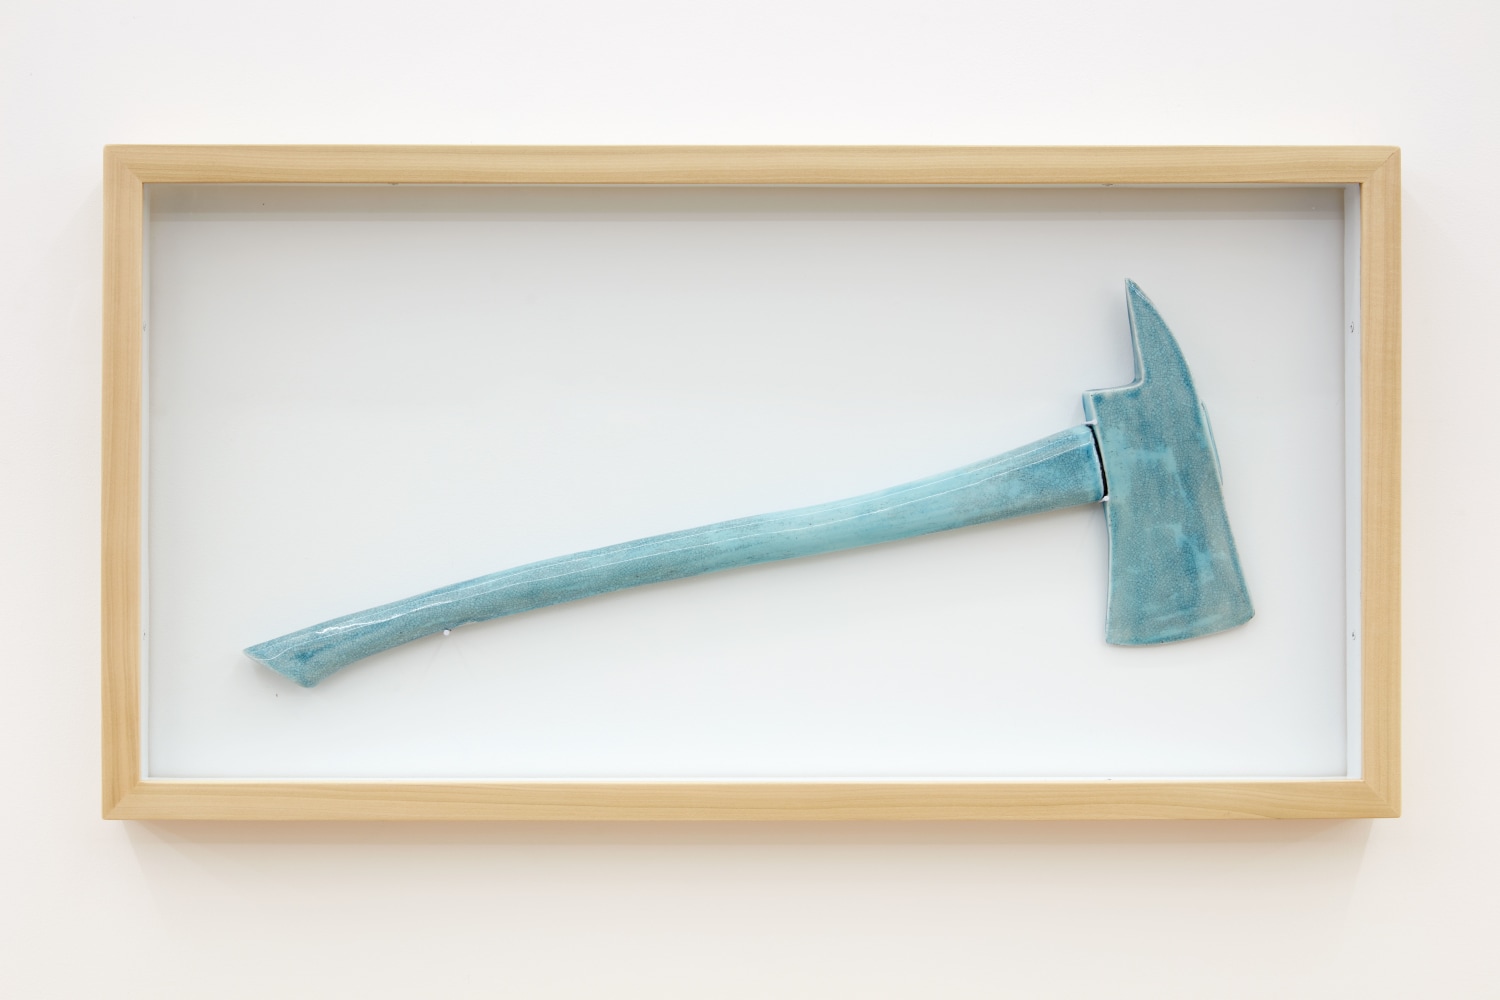 
Nicholas Galanin

Break in case of emergency (Blue), 2022

porcelain and wooden box with glass

wooden box with glass: 16 x 31 1/4 x 2 inches (40.6 x 79.4 x 5.1 cm)
axe: 24 x 9 x 1 inches (61 x 22.9 x 2.5 cm)

(NGA22-10)